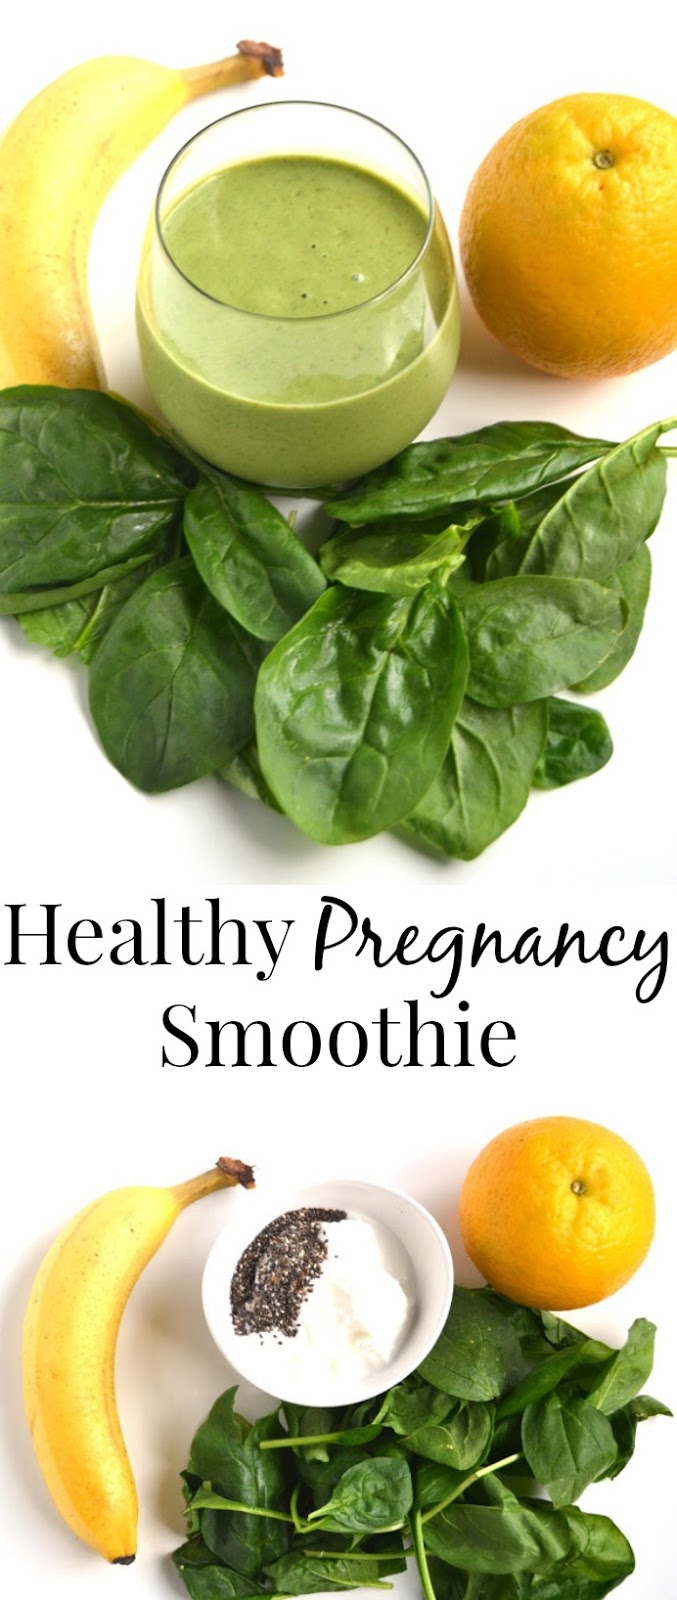 Healthy Pregnancy Smoothie | The Nutritionist Reviews